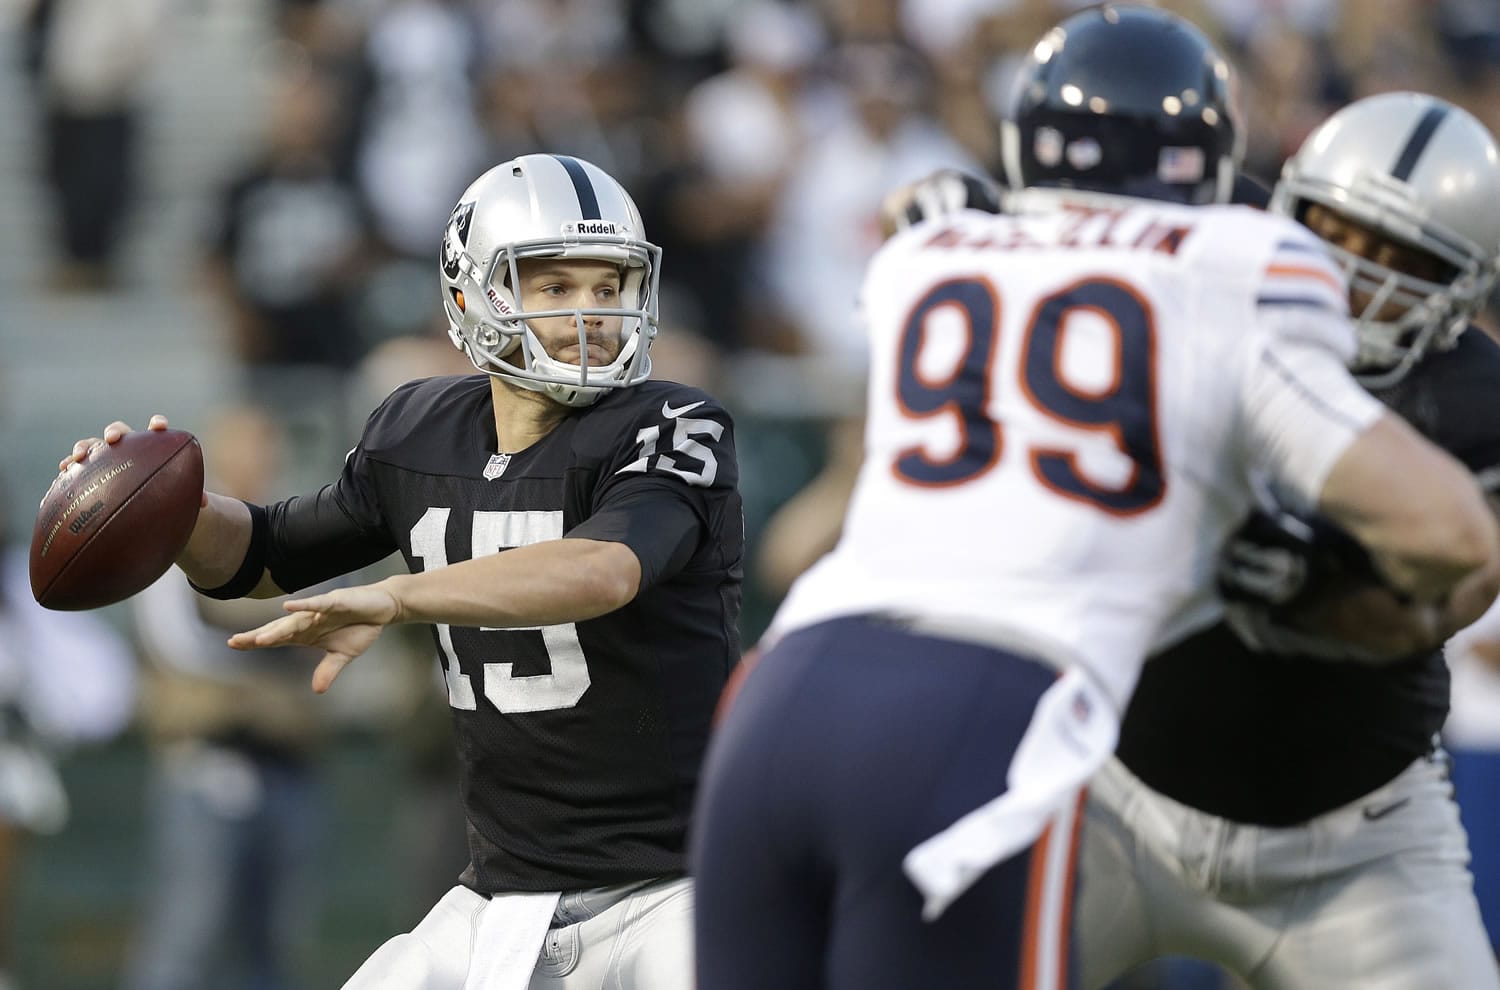 Oakland Raiders quarterback Matt Flynn (15) looks to throw as Chicago Bears defensive end Shea McClellin (99) rushes during the first quarter of an NFL preseason football game in Oakland, Calif., Friday, Aug. 23, 2013.